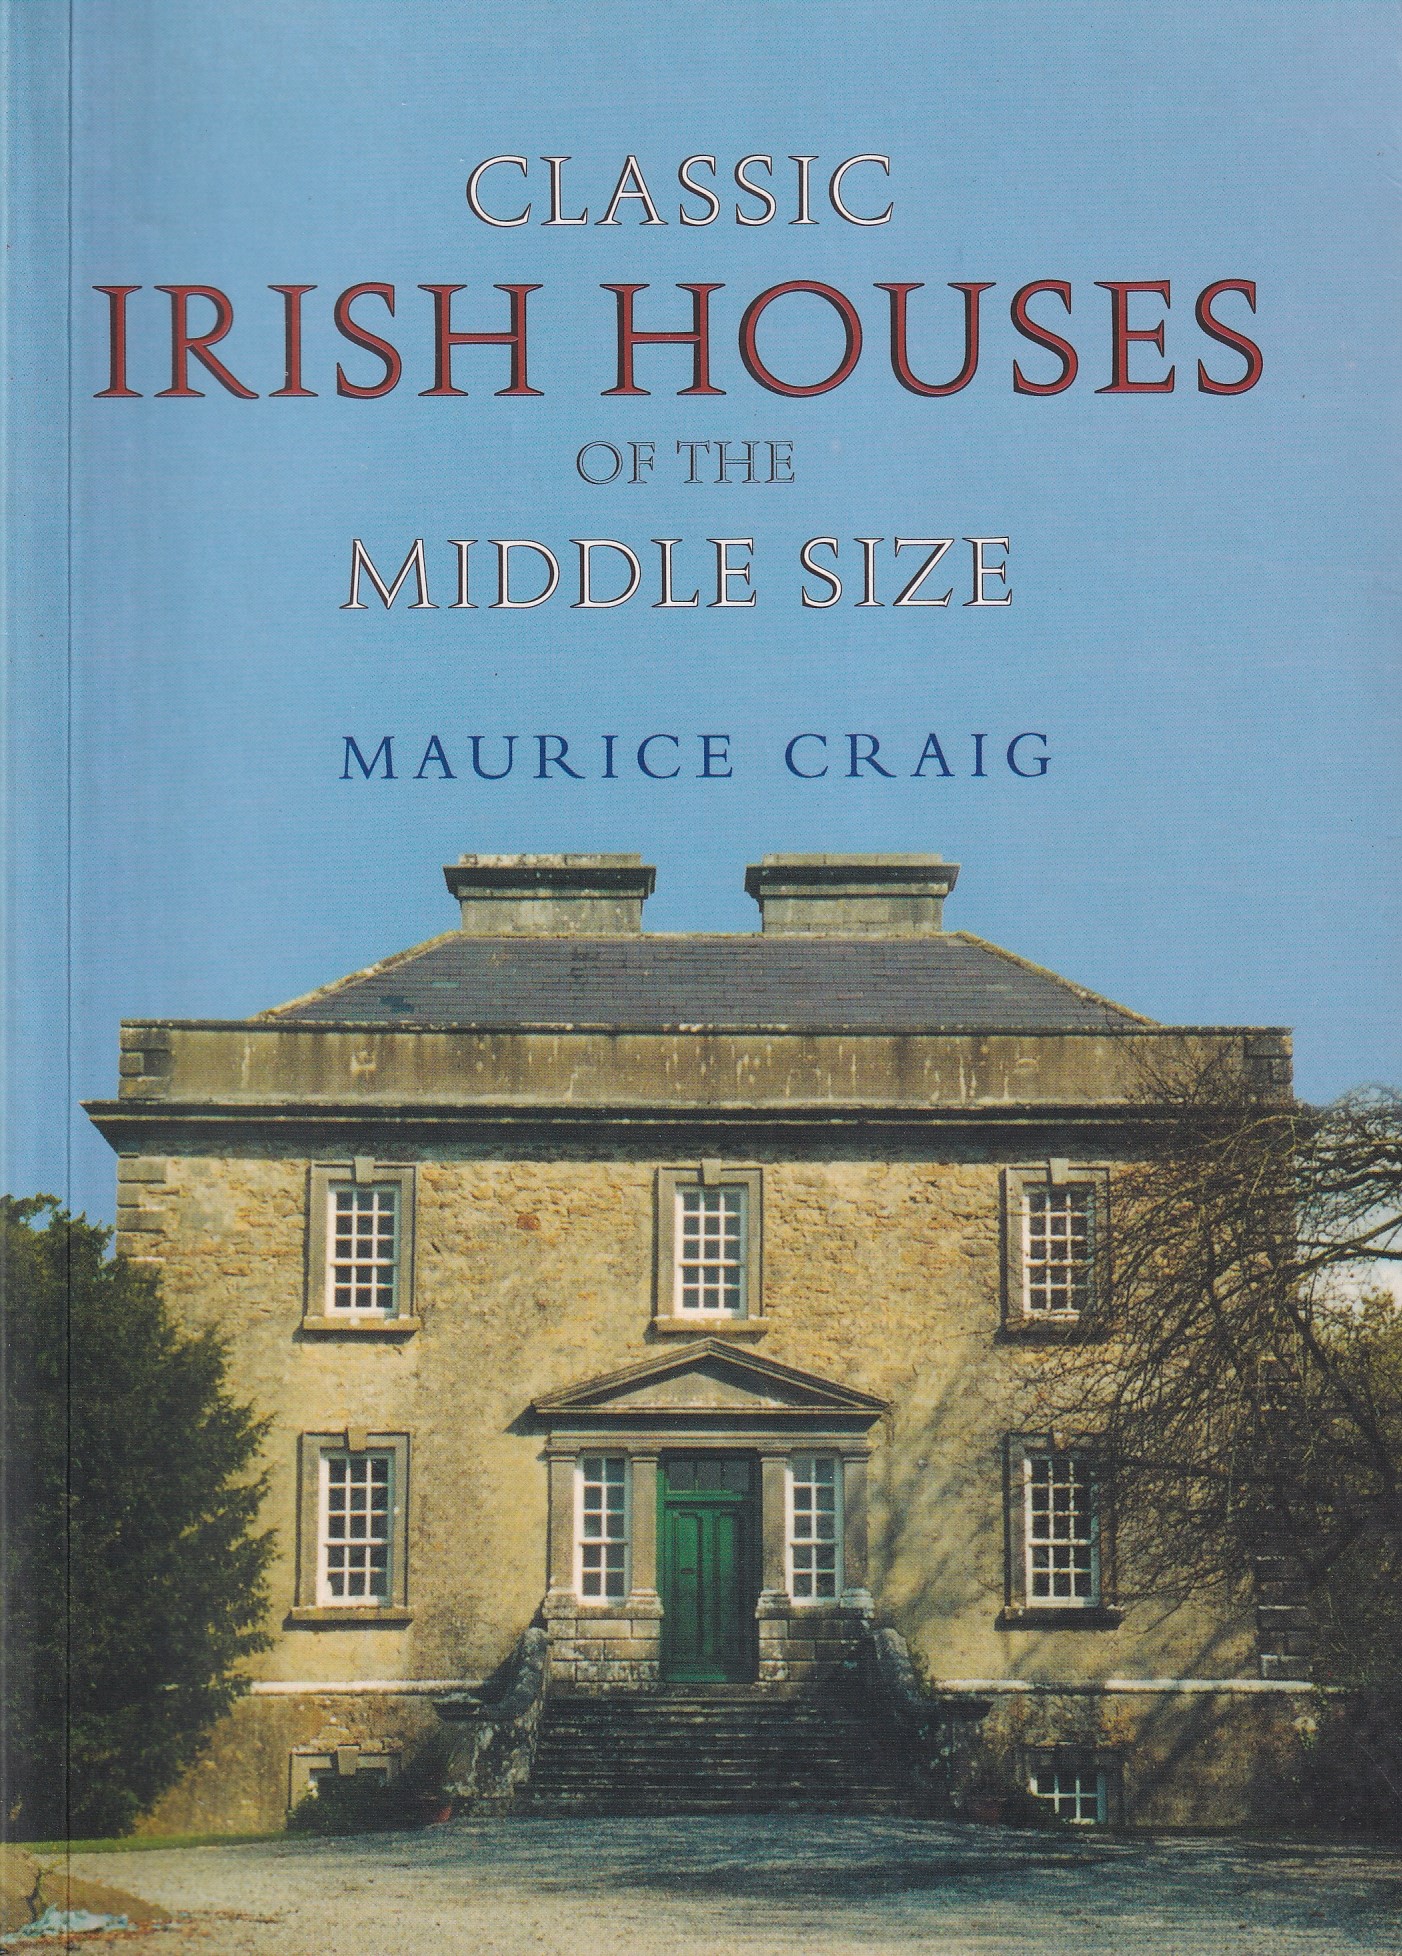 Classic Irish Houses of the Middle Size | Maurice Craig | Charlie Byrne's